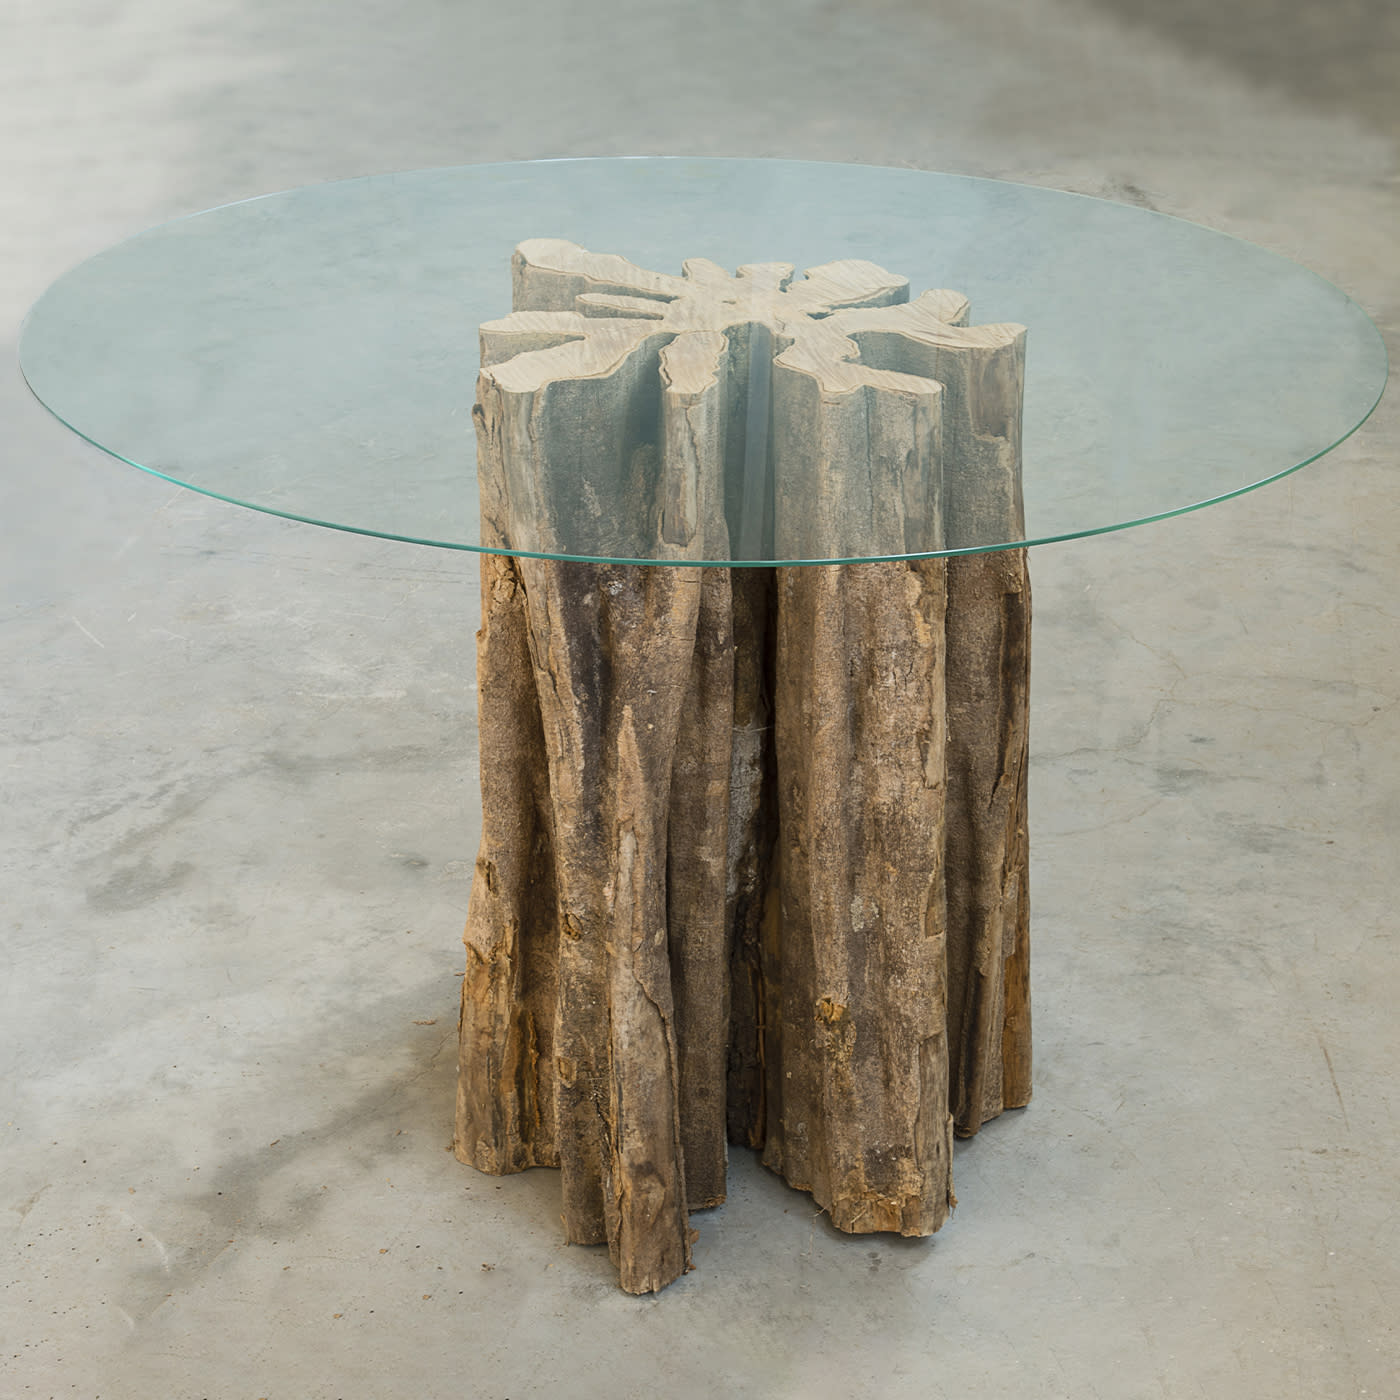 Parno Table - Slow Wood by Gianni Cantarutti